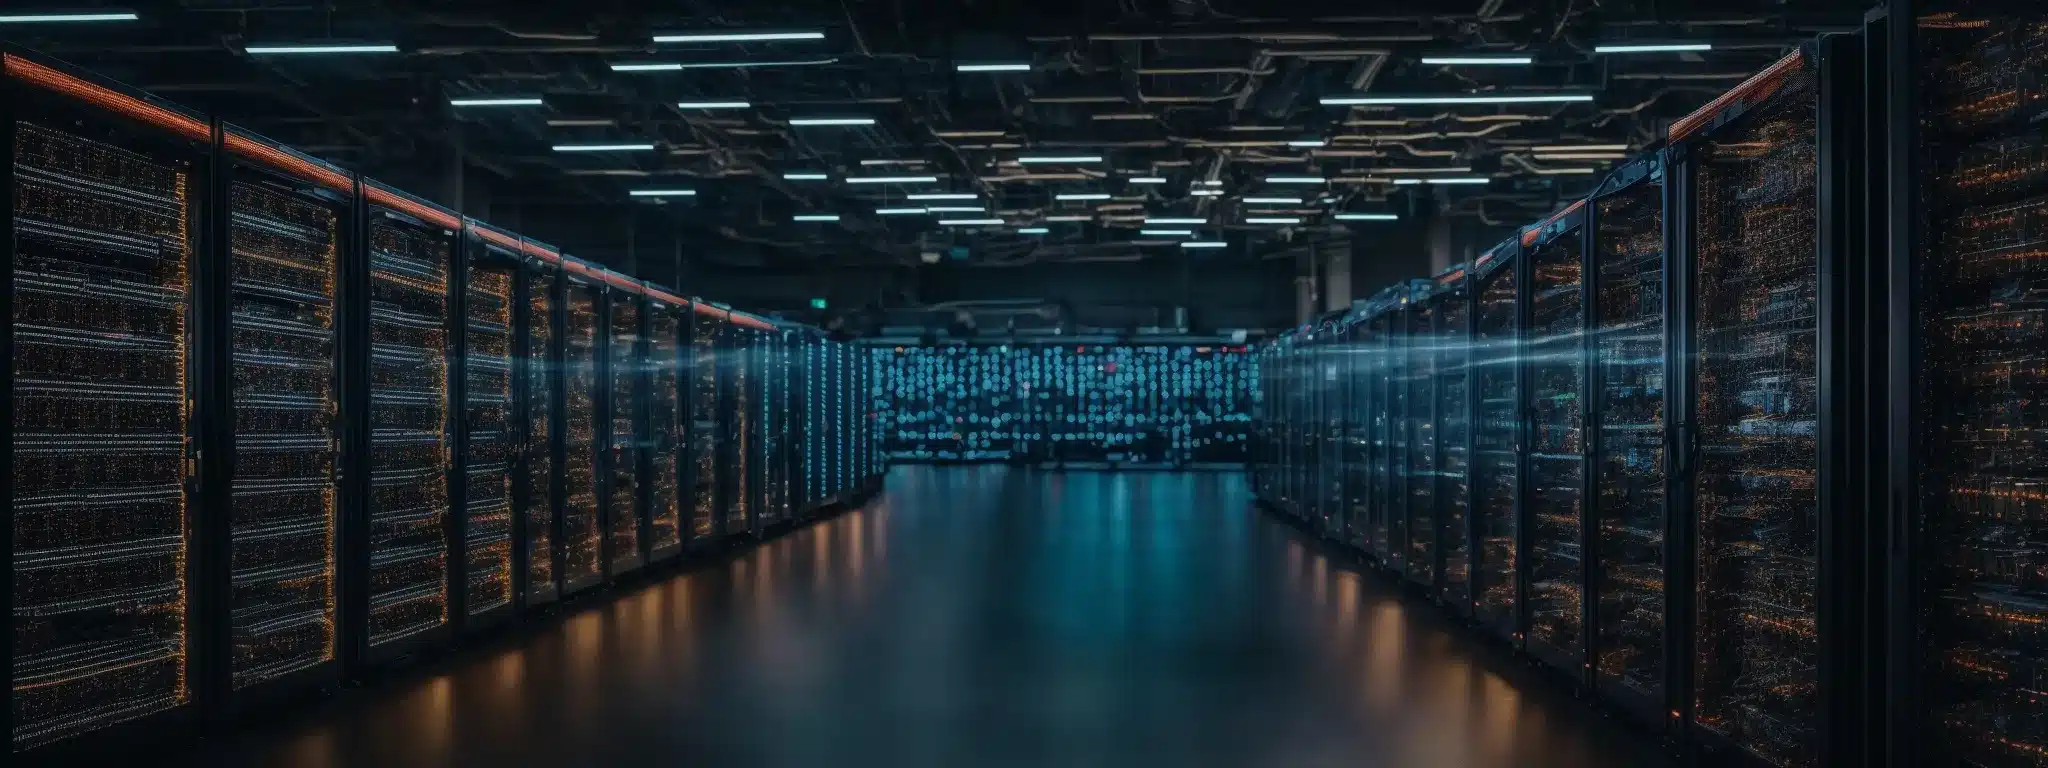 A Sprawling Server Room Filled With Blinking Lights, Symbolizing The Power Of Automation In Digital Marketing Orchestration.